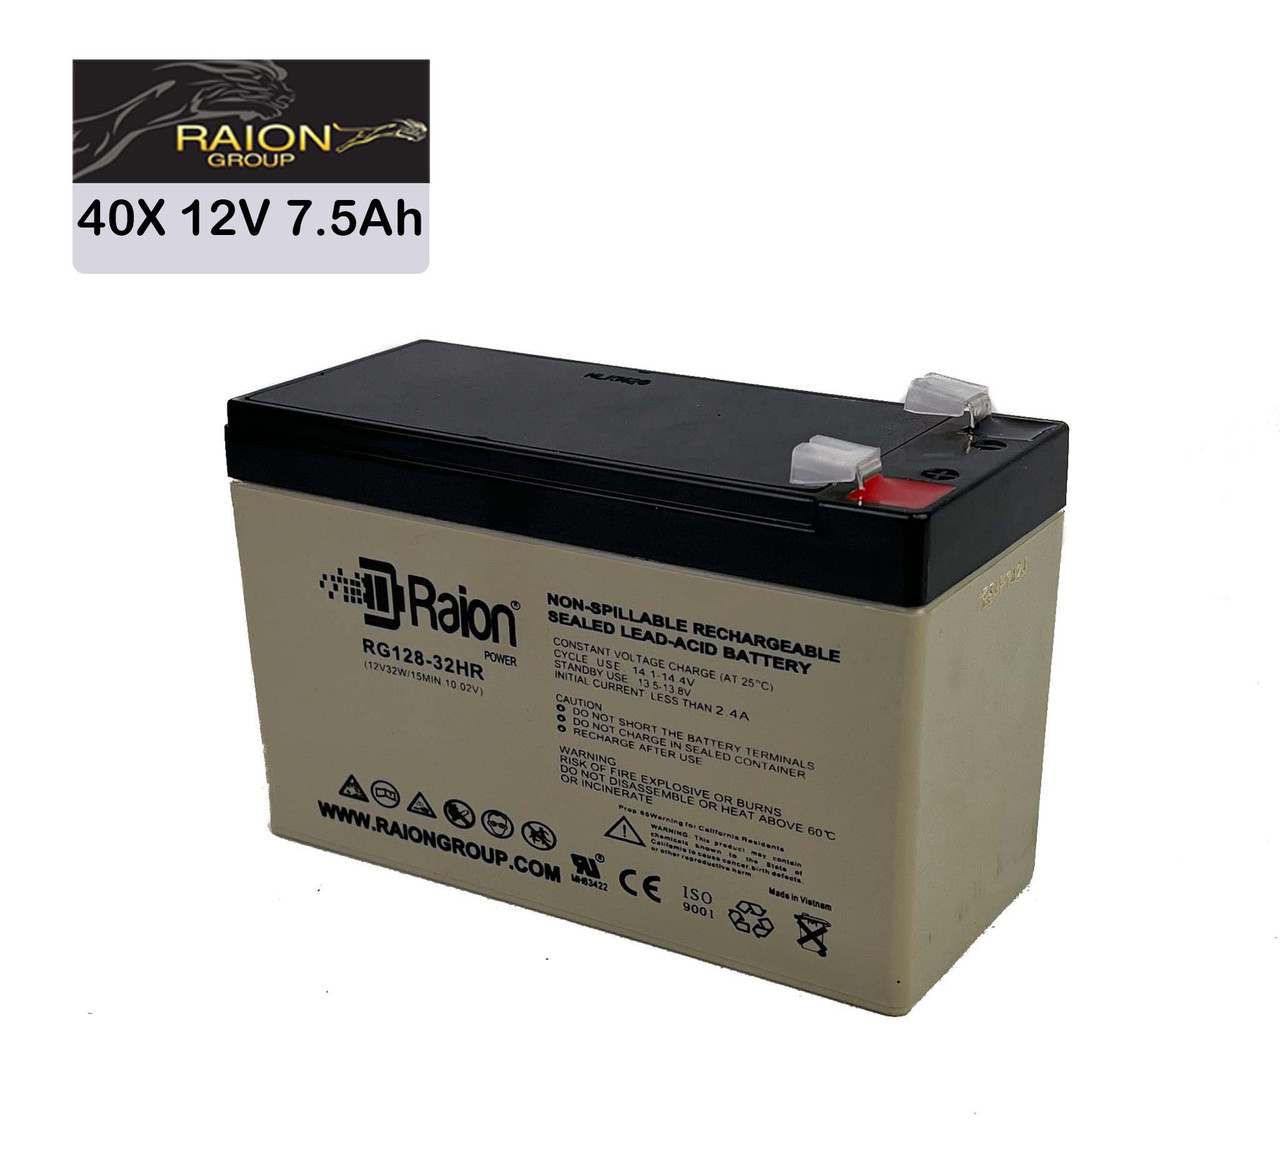 Raion Power 12V 7.5Ah High Rate Discharge UPS Batteries for ONEAC SE162XJT - 40 Pack